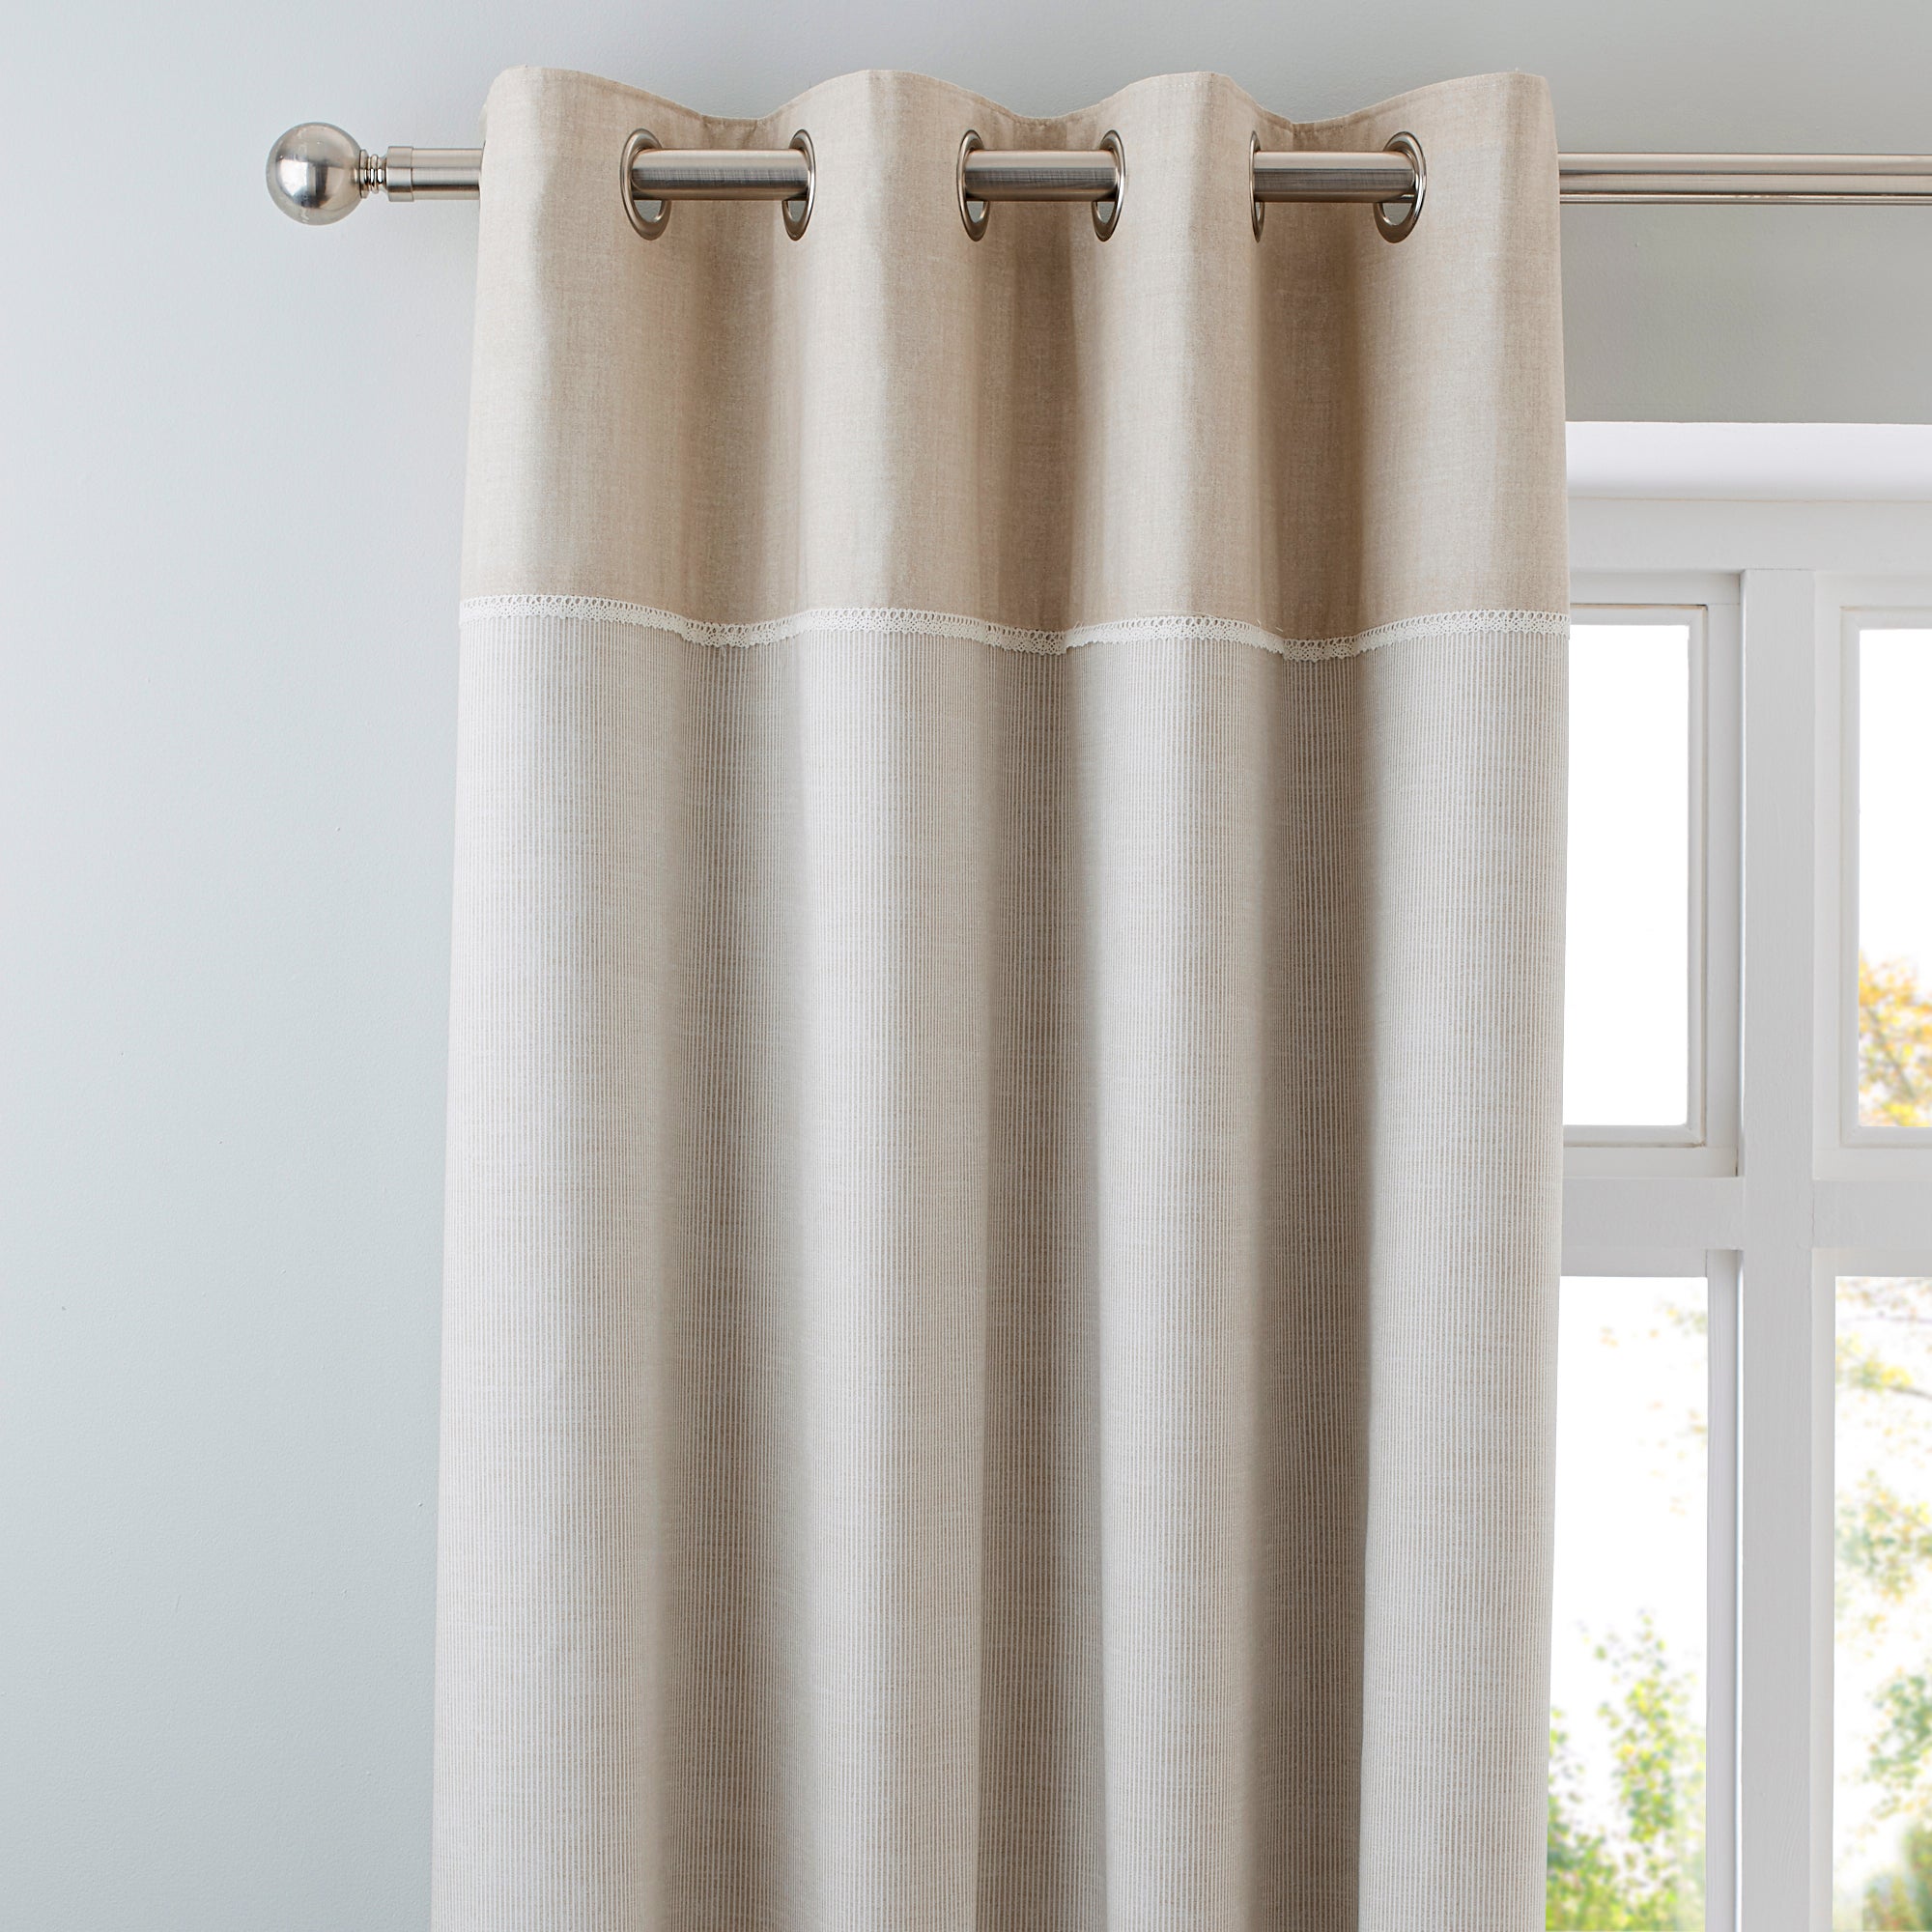 Natural Millie Thermal Eyelet Curtains | Dunelm